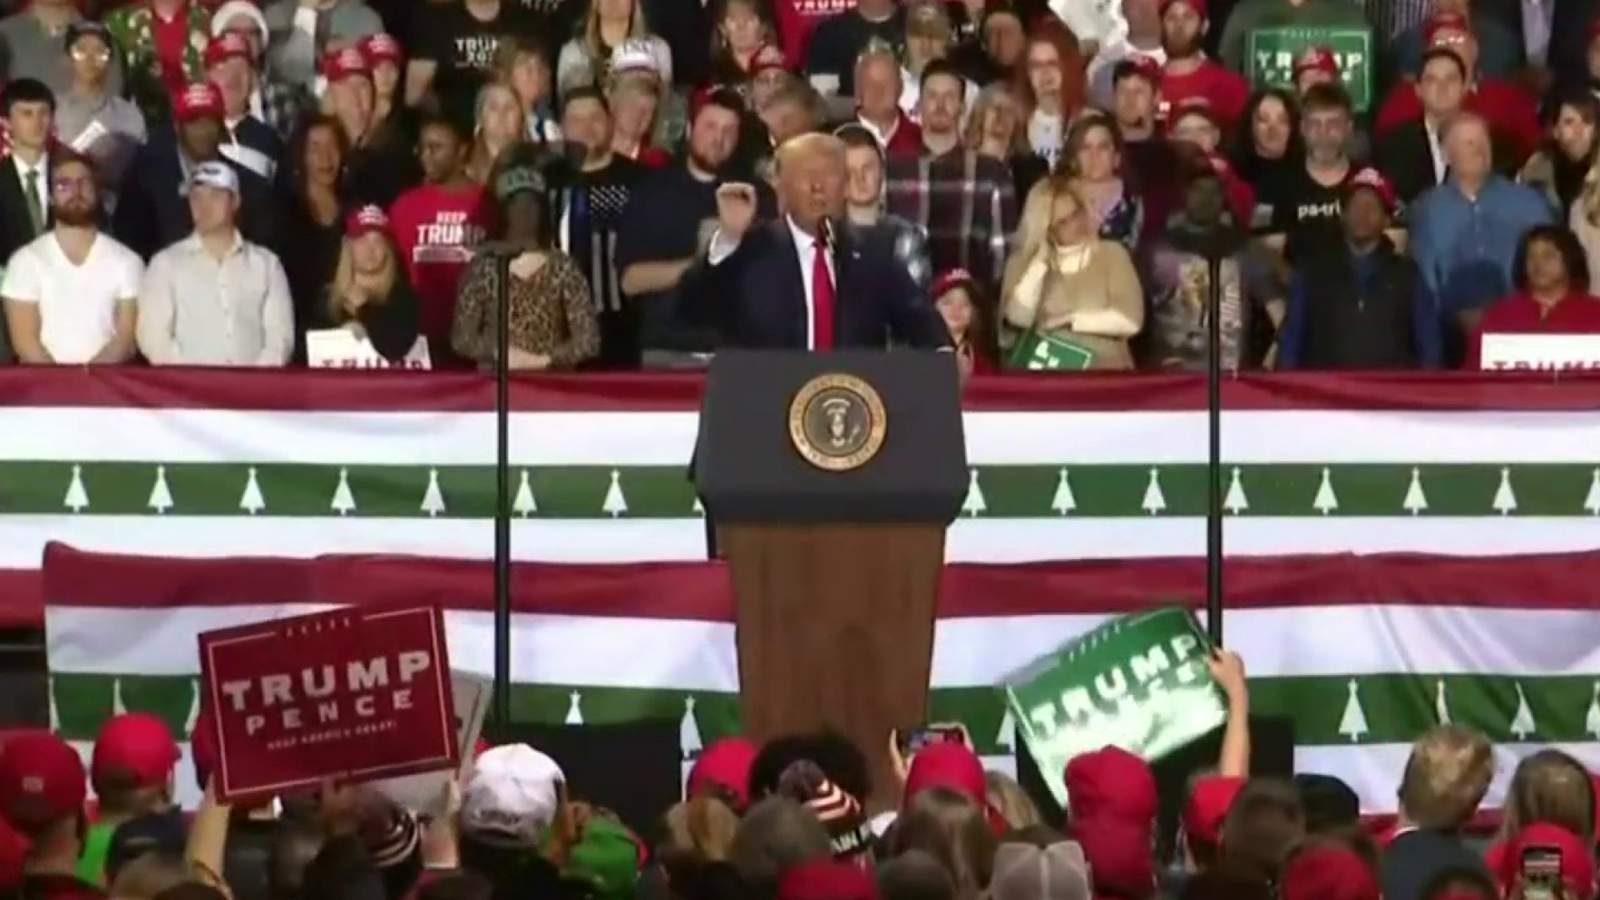 President Trump delivers speech in Battle Creek while being impeached